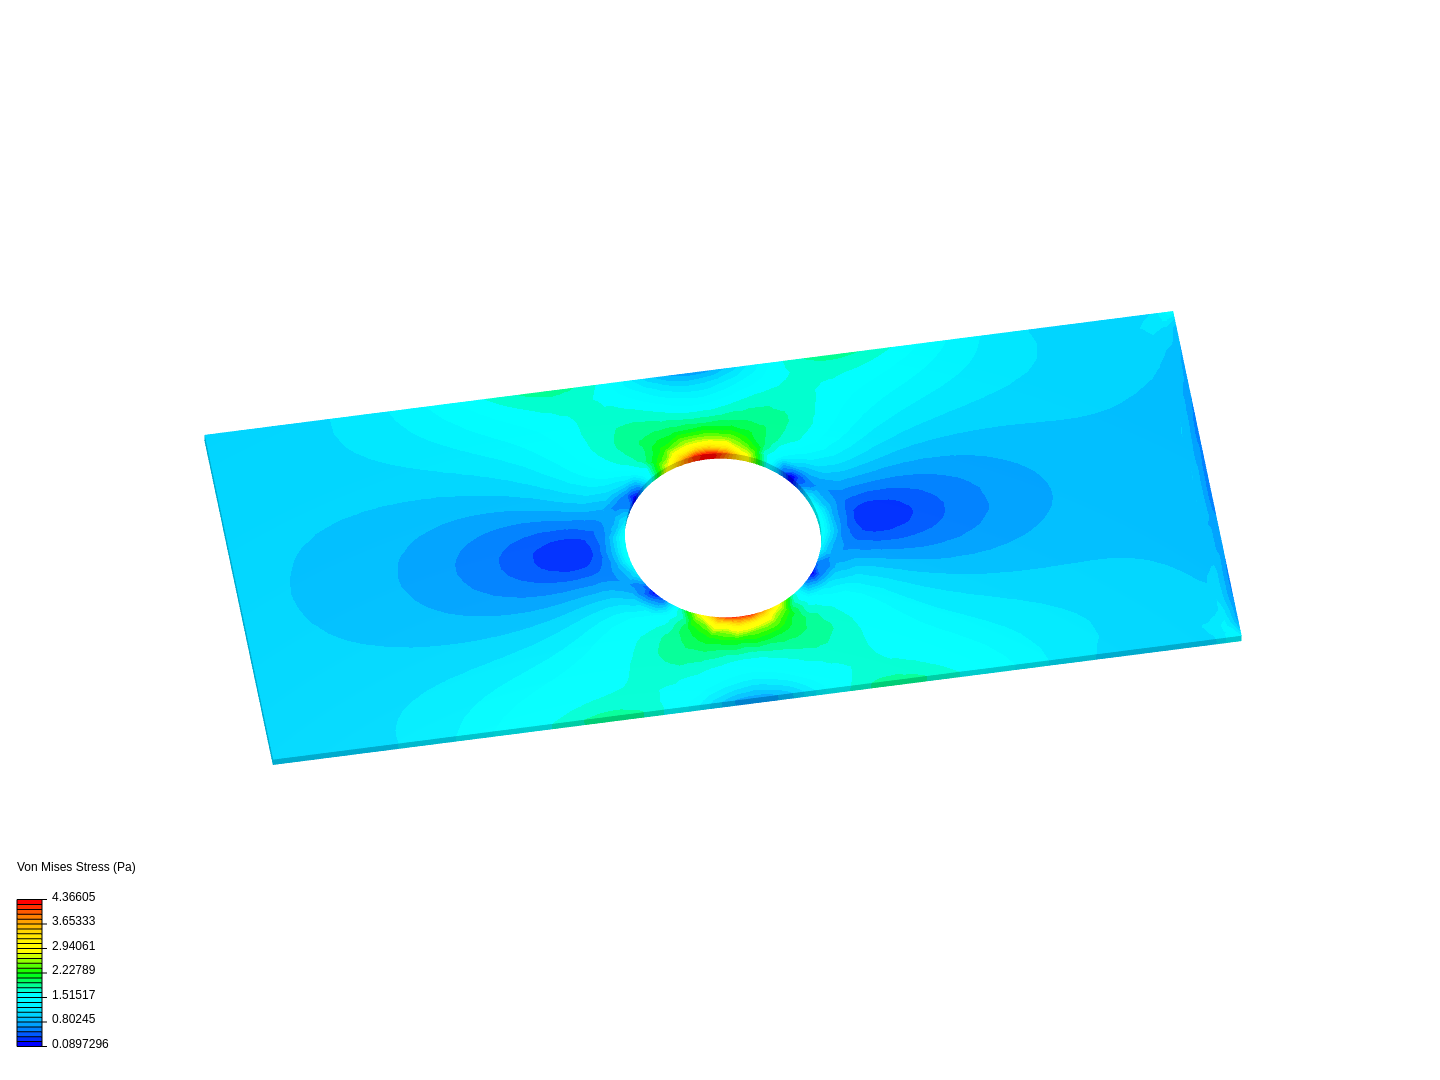 Analysis of a Plate with a Hole image